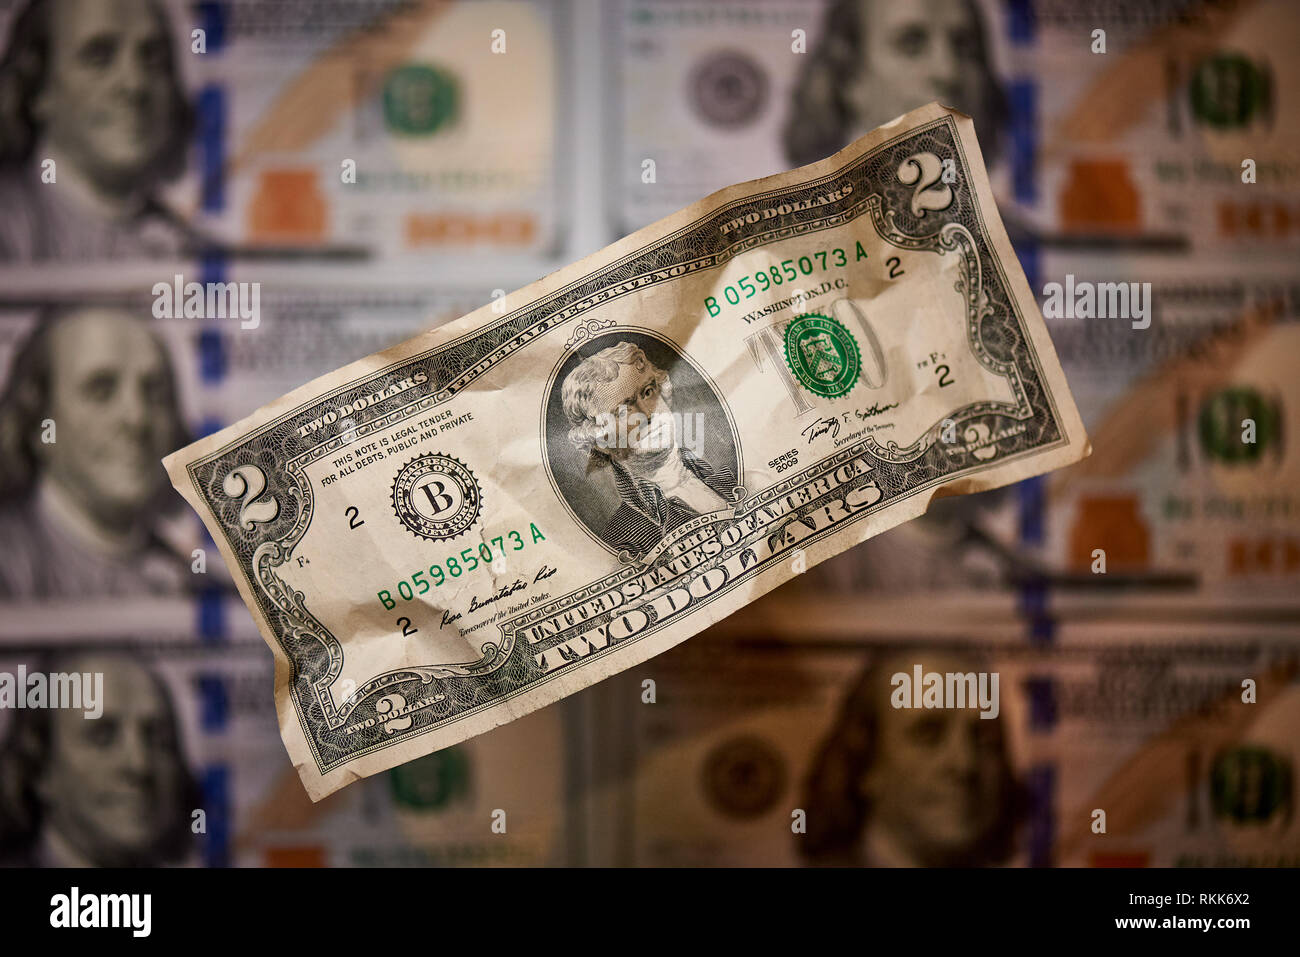 Two crumpled dollars on a blurred background of bills worth one hundred dollars the new American bill. Stock Photo